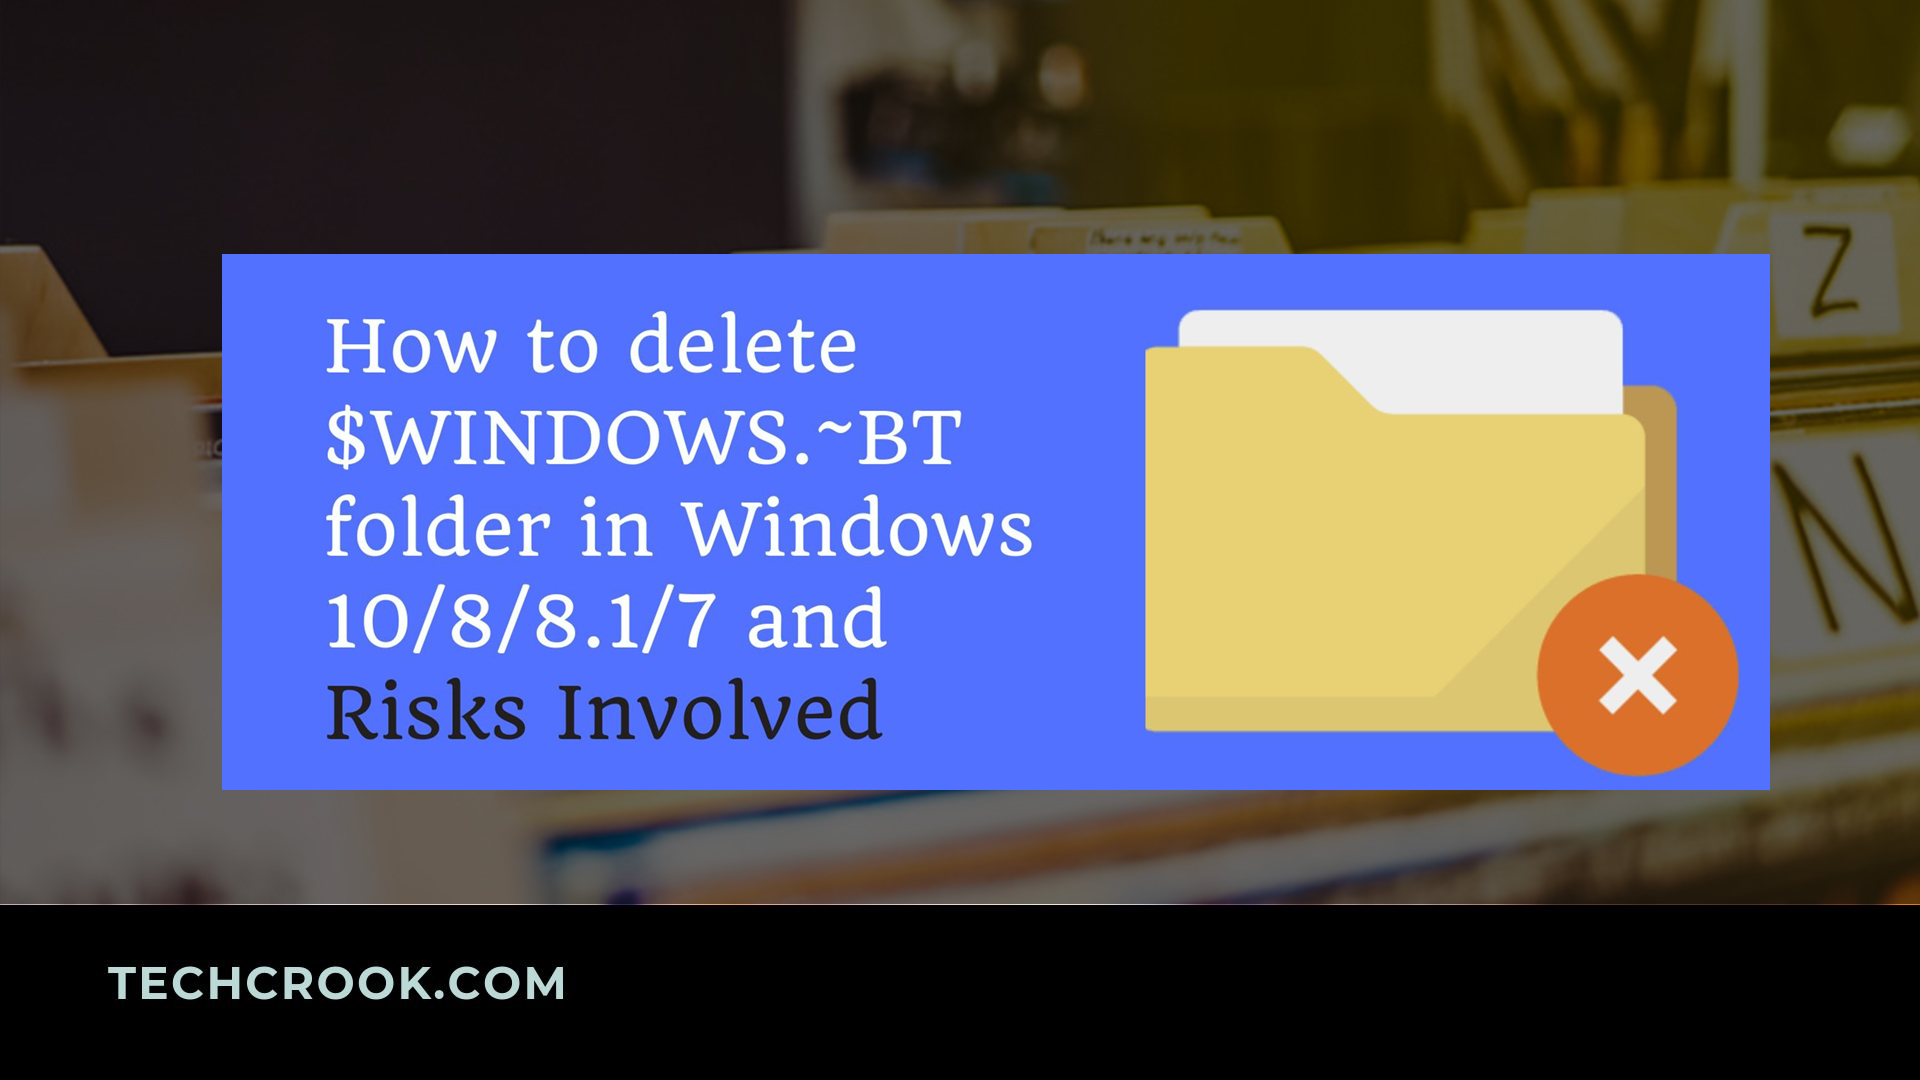 How to delete $WINDOWS.~BT file in Windows 10/8/8.1/7 and risks involved